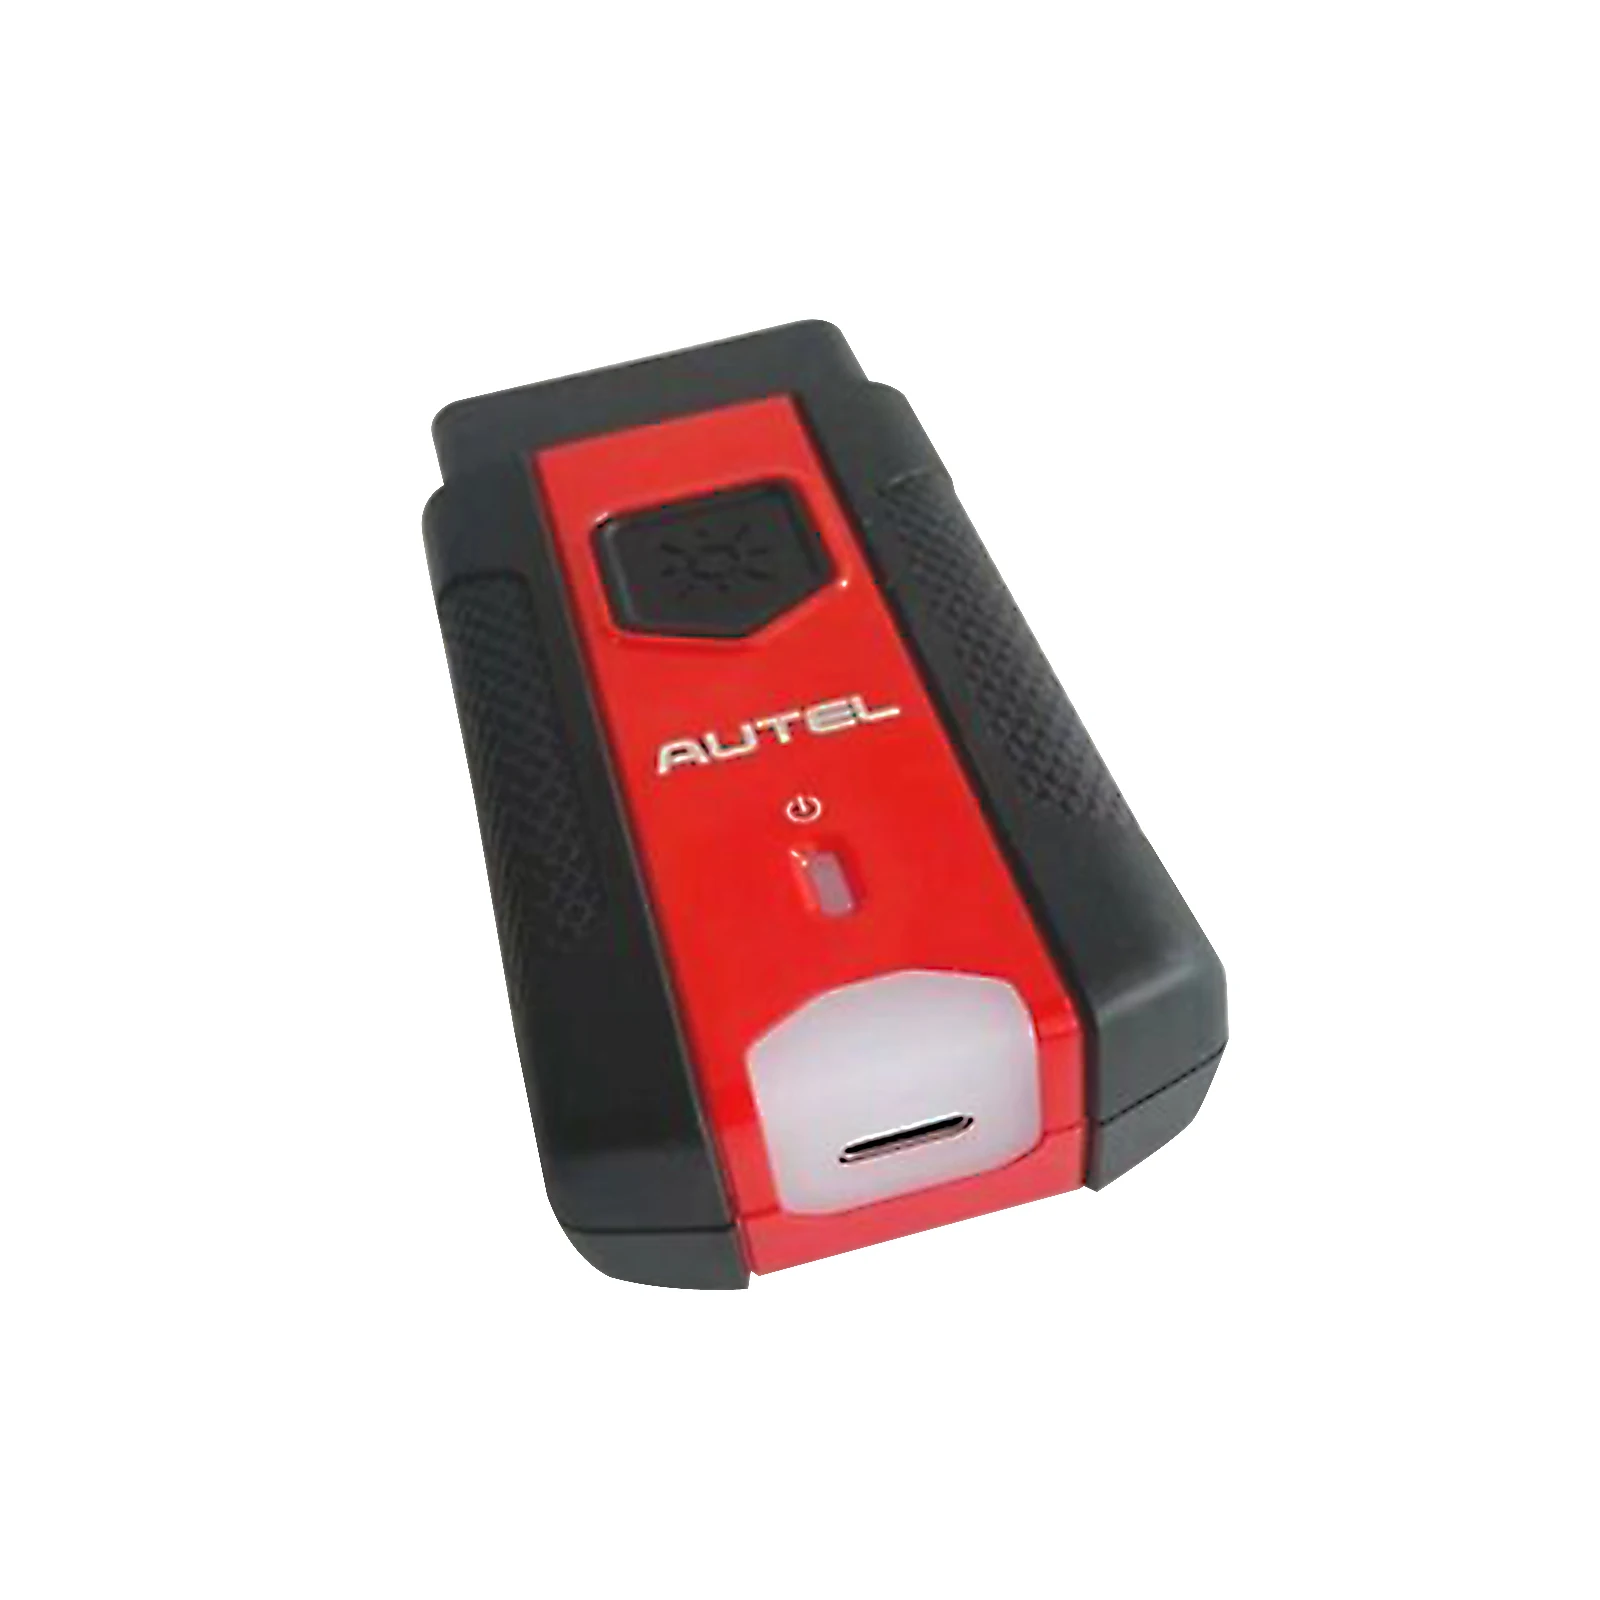 best car inspection equipment Autel MaxiVCI VCI 200 Bluetooth Used With Diagnostic Tablets MS906 PRO ITS600K8 best car battery charger